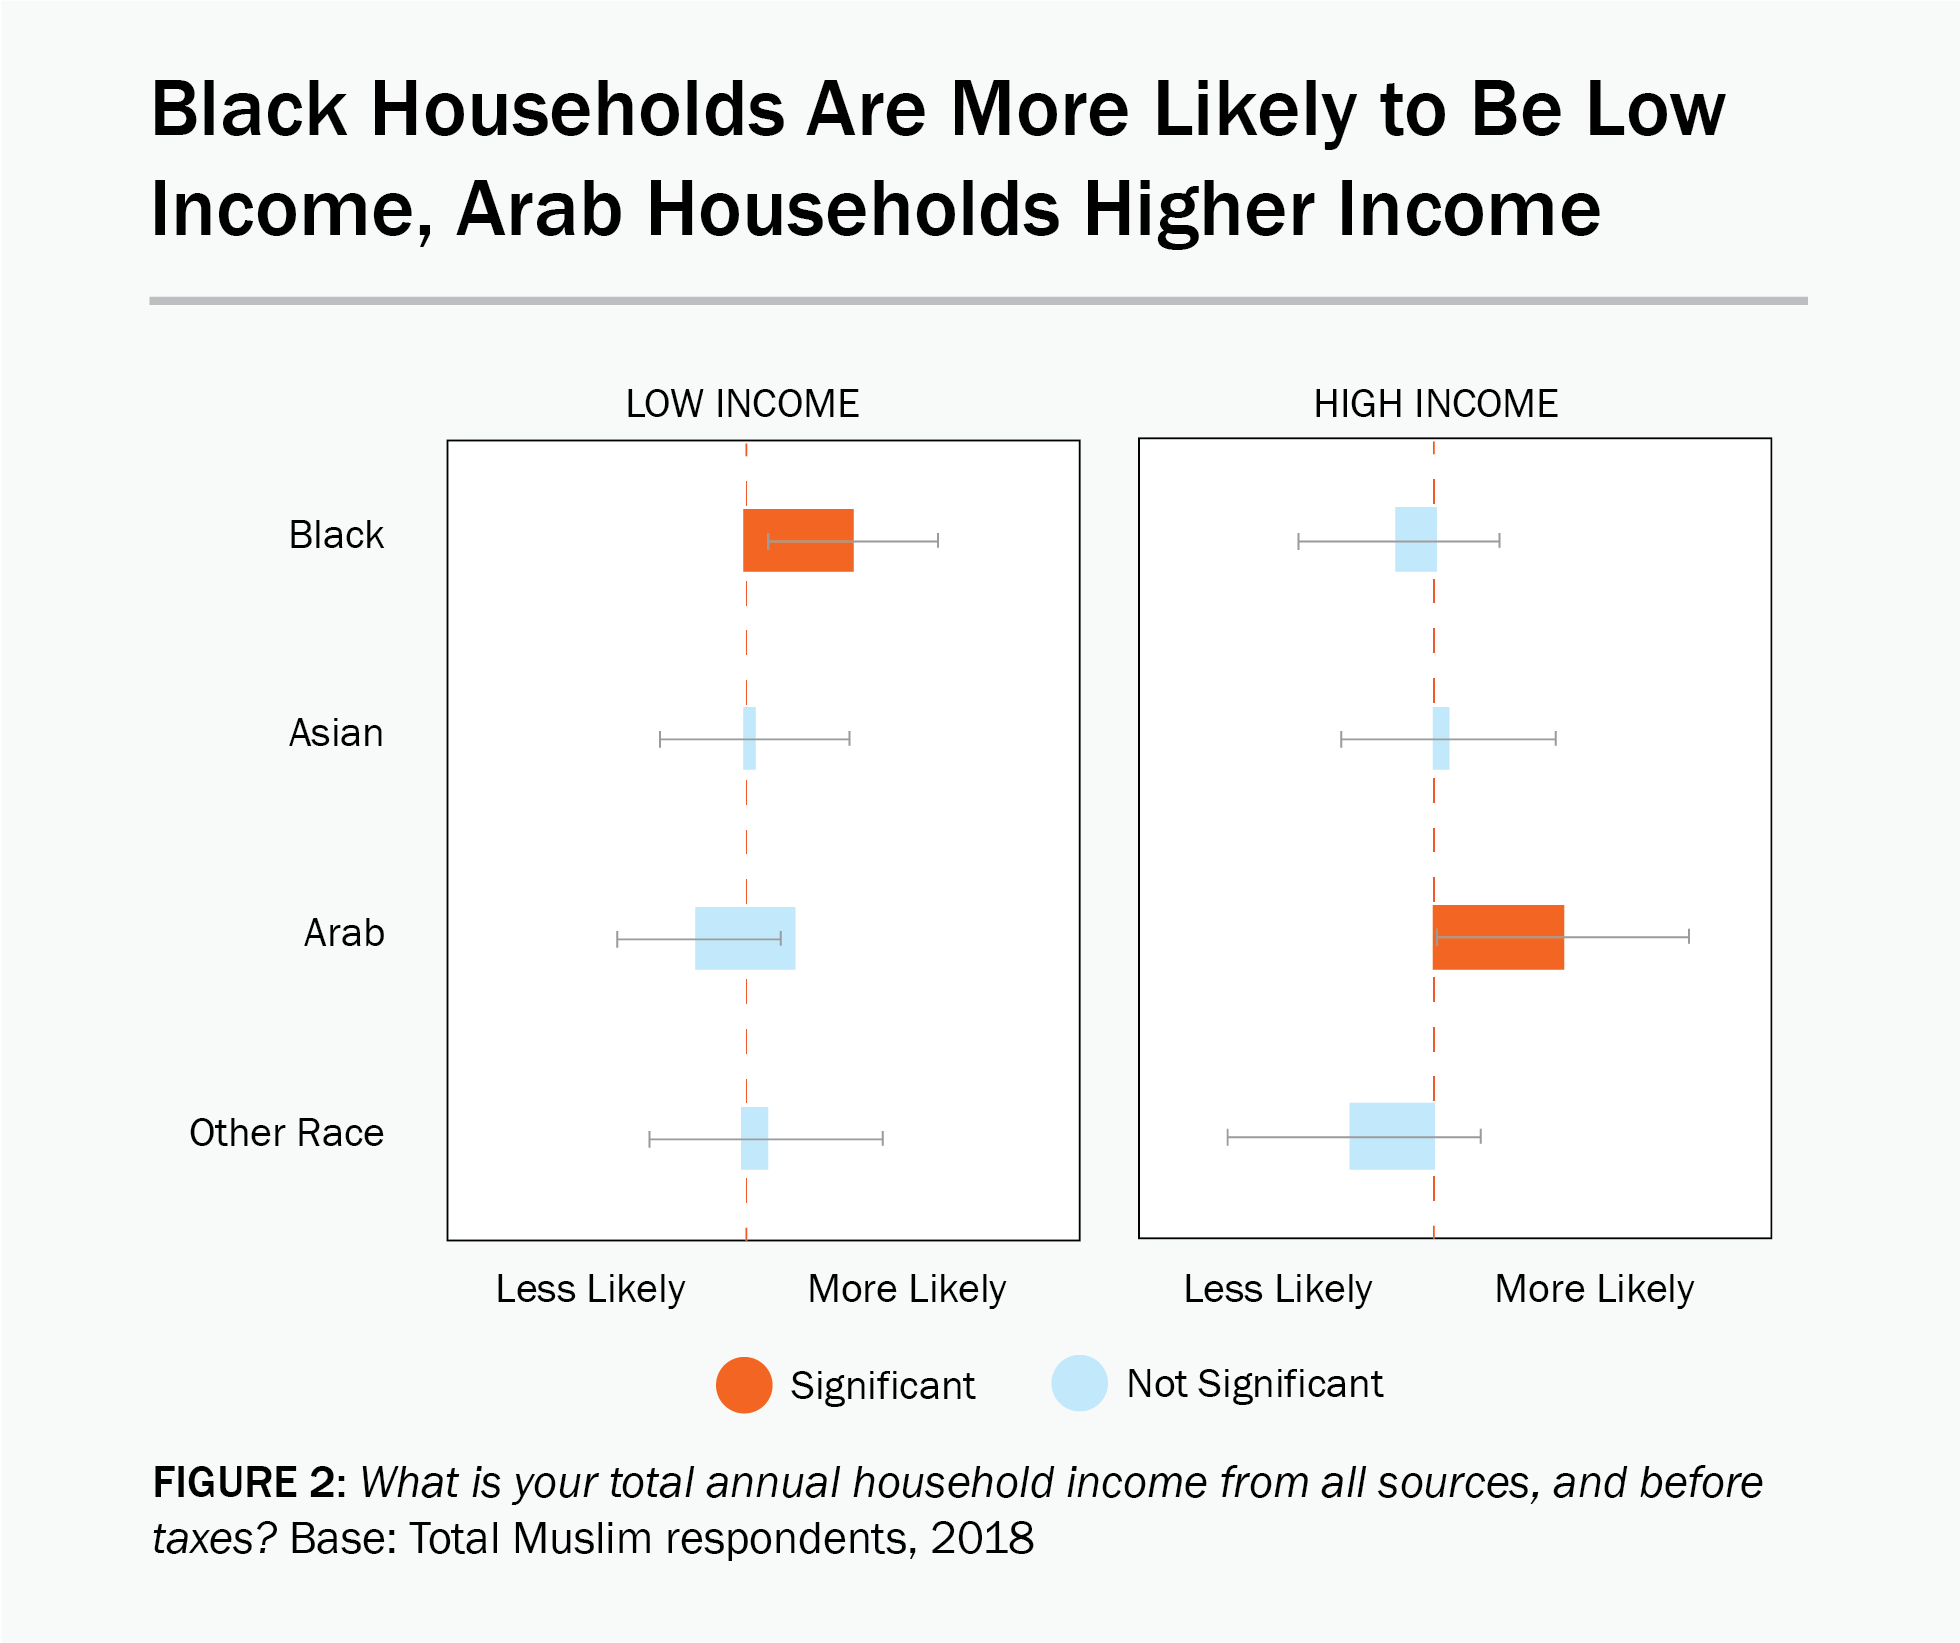 Figure 2: A data chart showing that Black Households are more likely to be low income and Arab households are more likely to be higher income